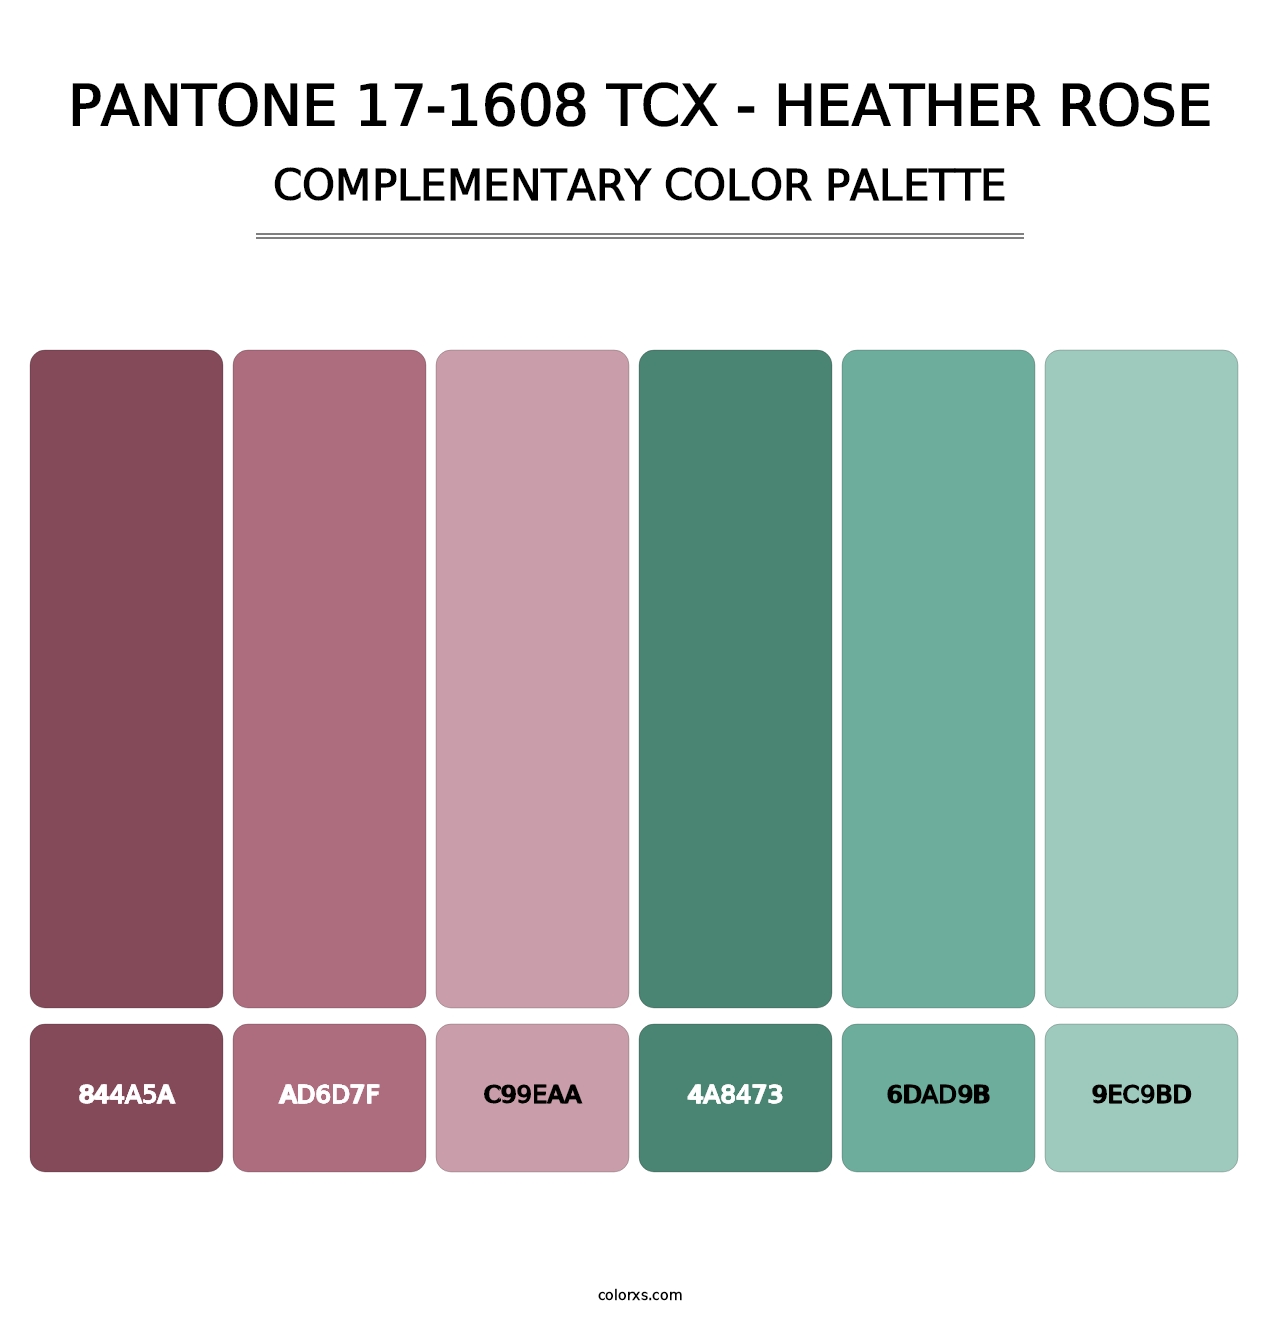 PANTONE 17-1608 TCX - Heather Rose - Complementary Color Palette